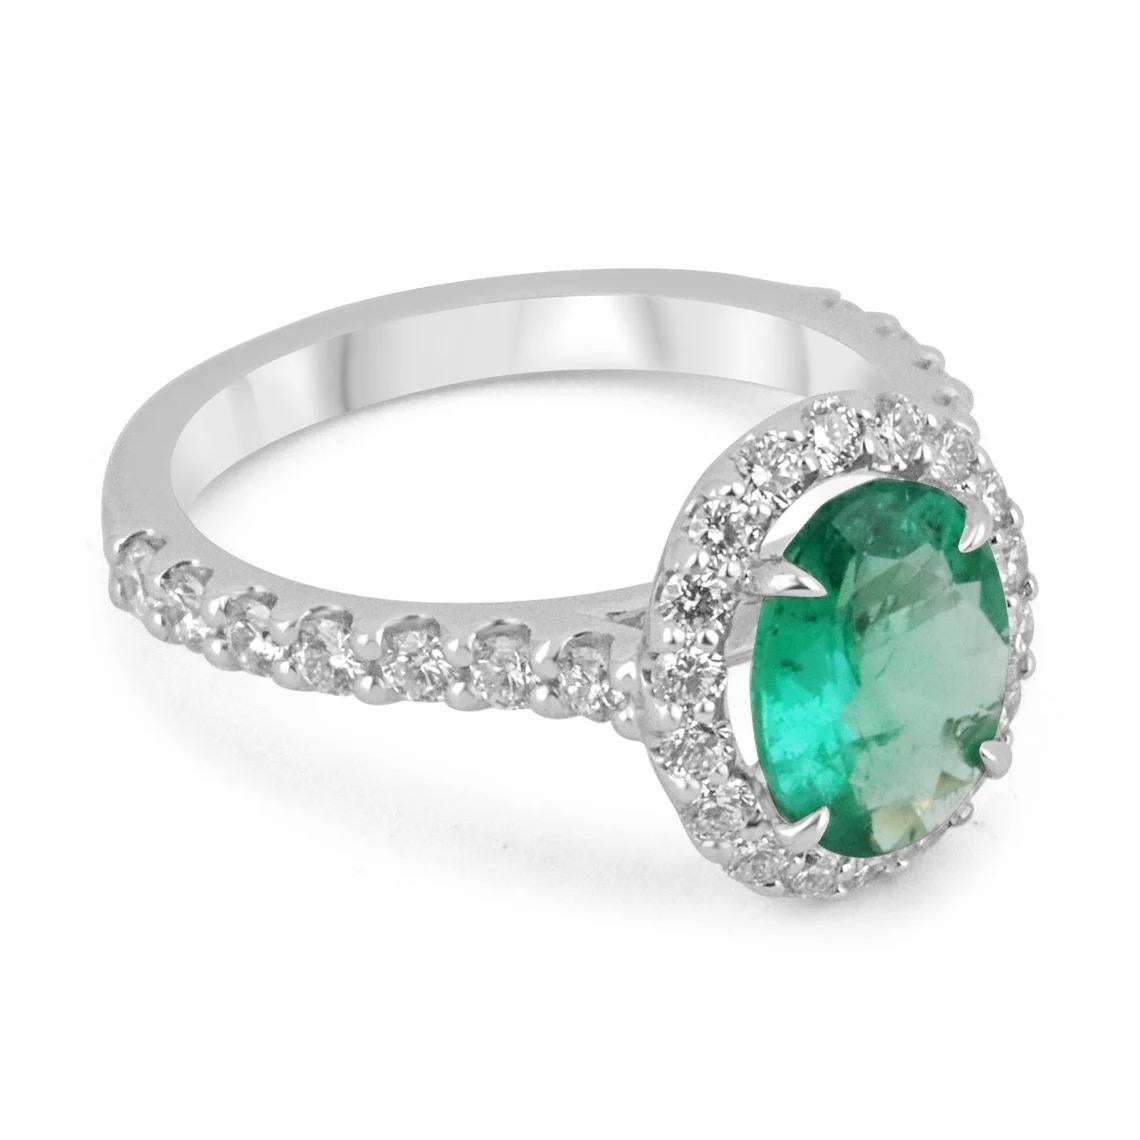 This is an exquisite, Zambian emerald and diamond halo ring. The gorgeous setting lets sit an excellent quality emerald with beautiful color and very good eye clarity. The emerald is not perfect and small imperfections do exist as it is a natural